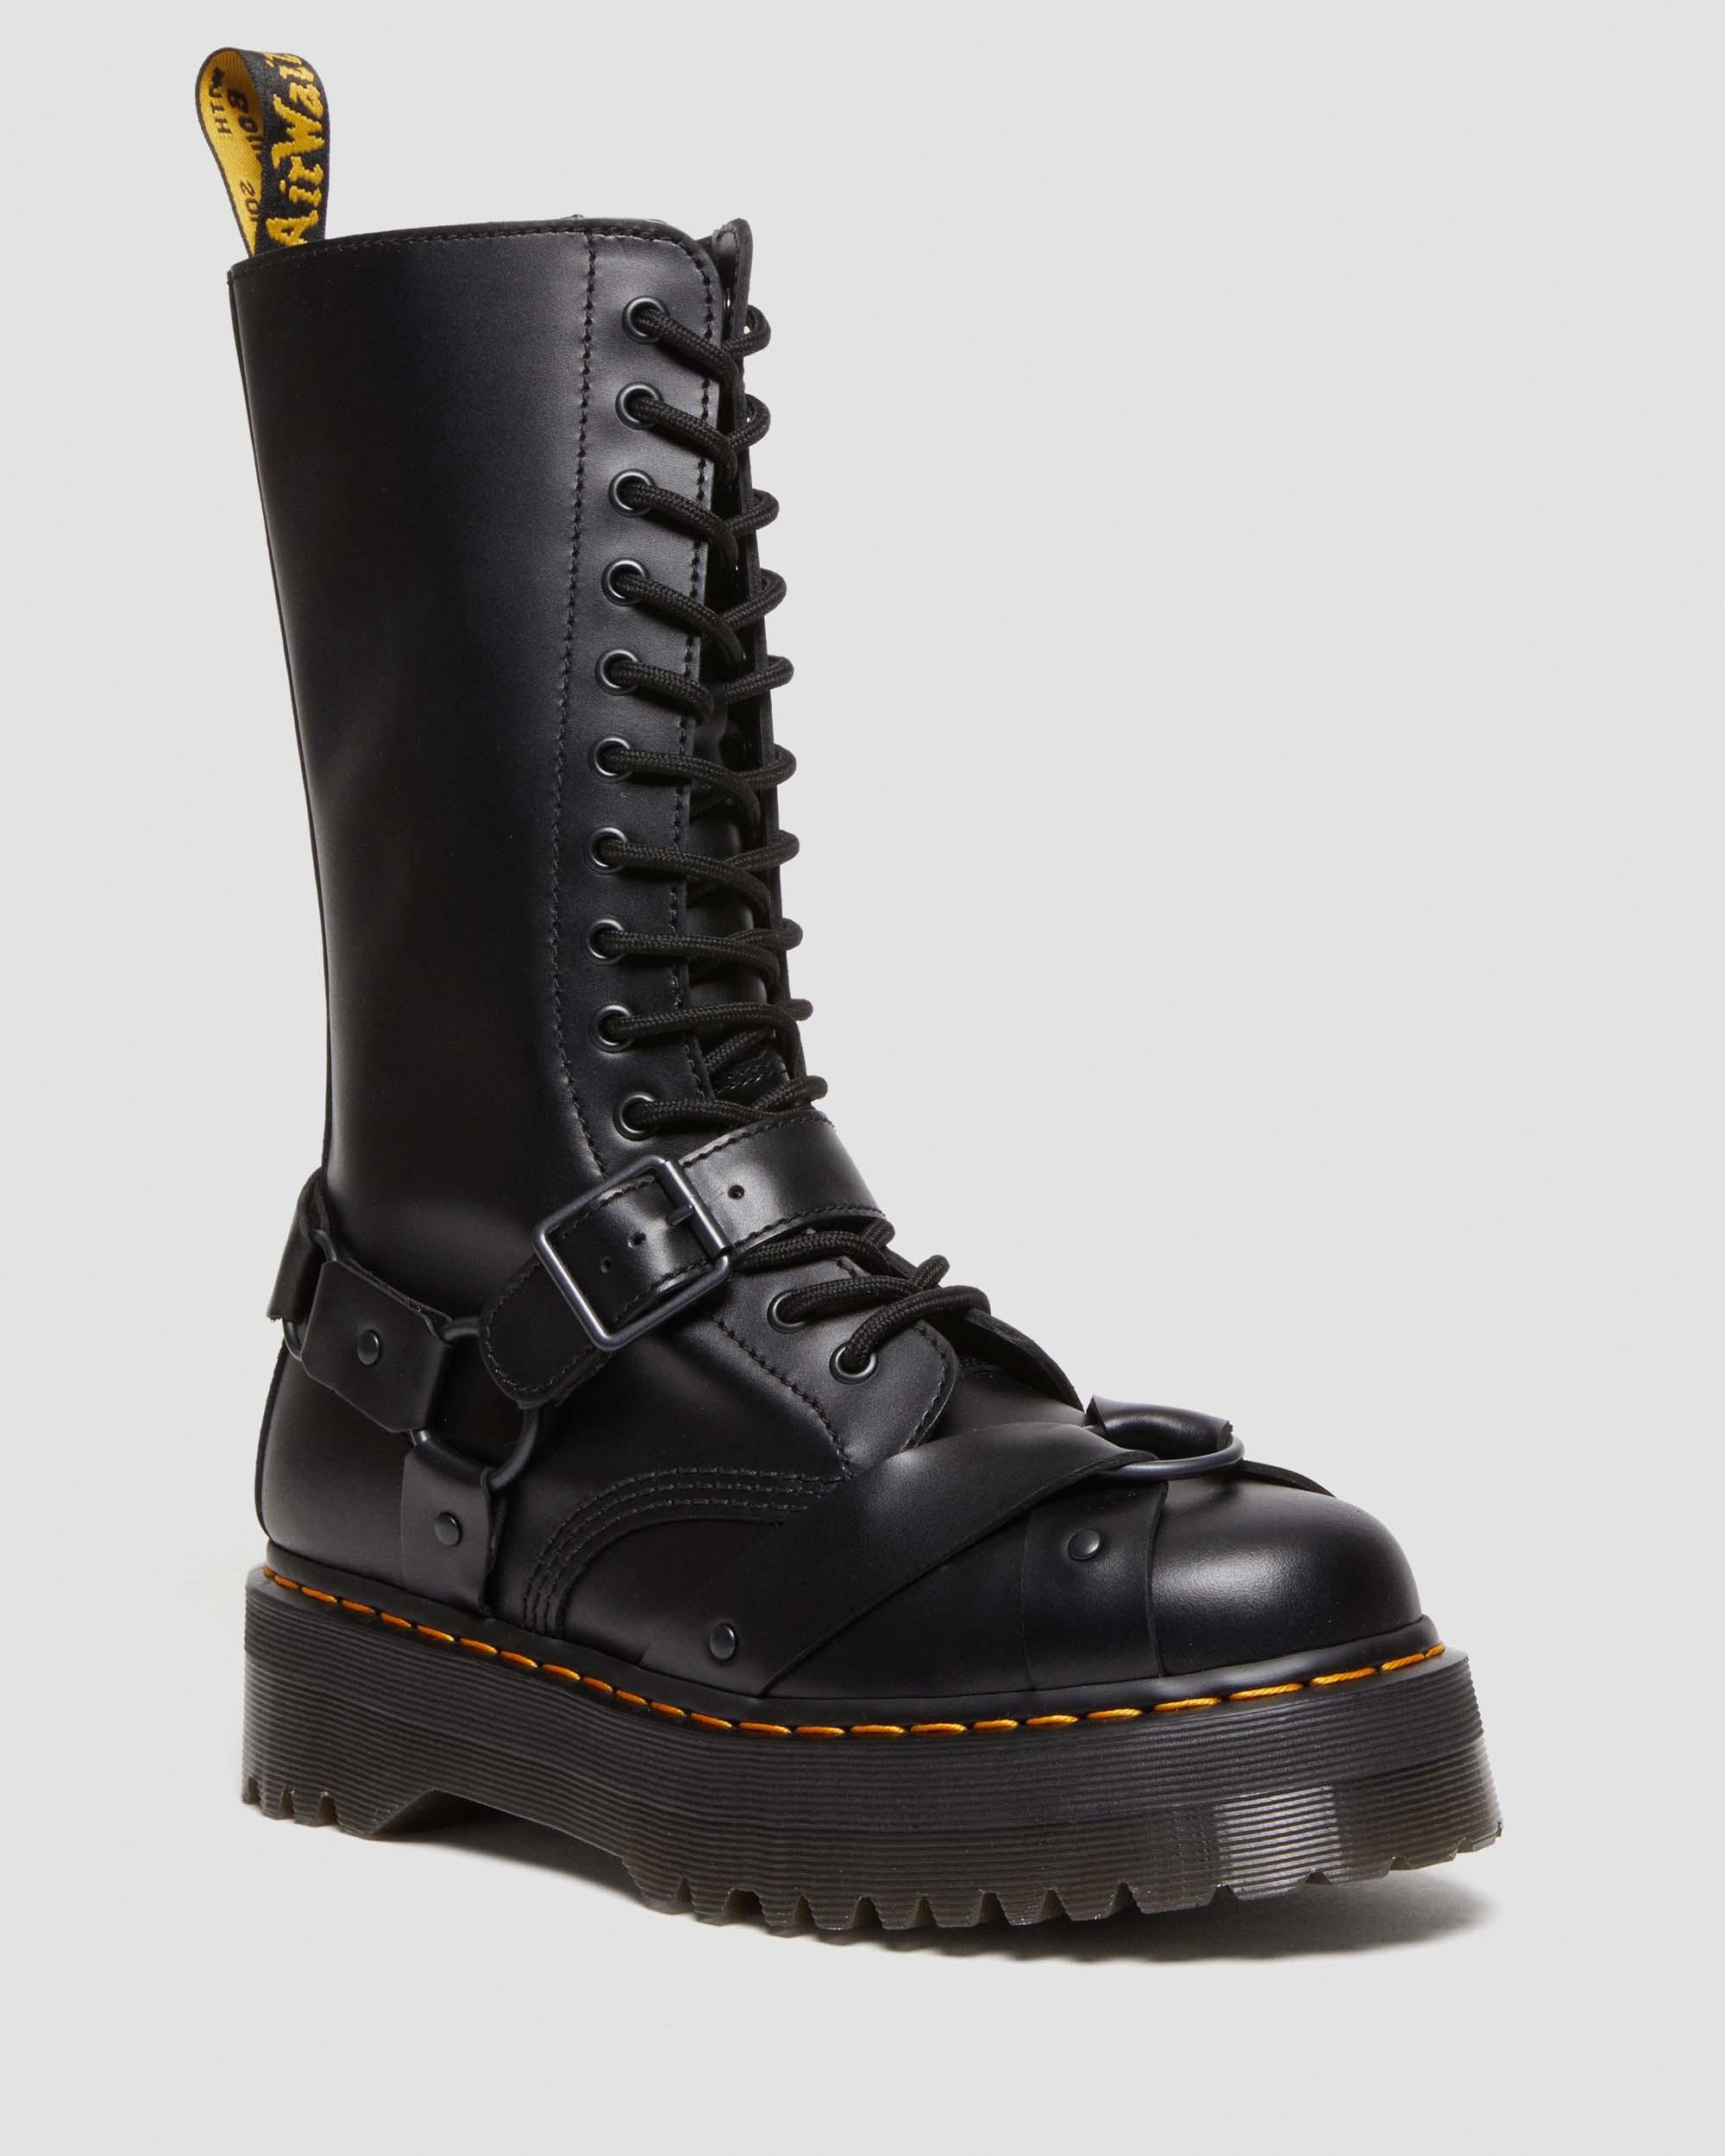 1914 Harness Leather Tall Lace Up Platform Boots, Black | Dr. Martens